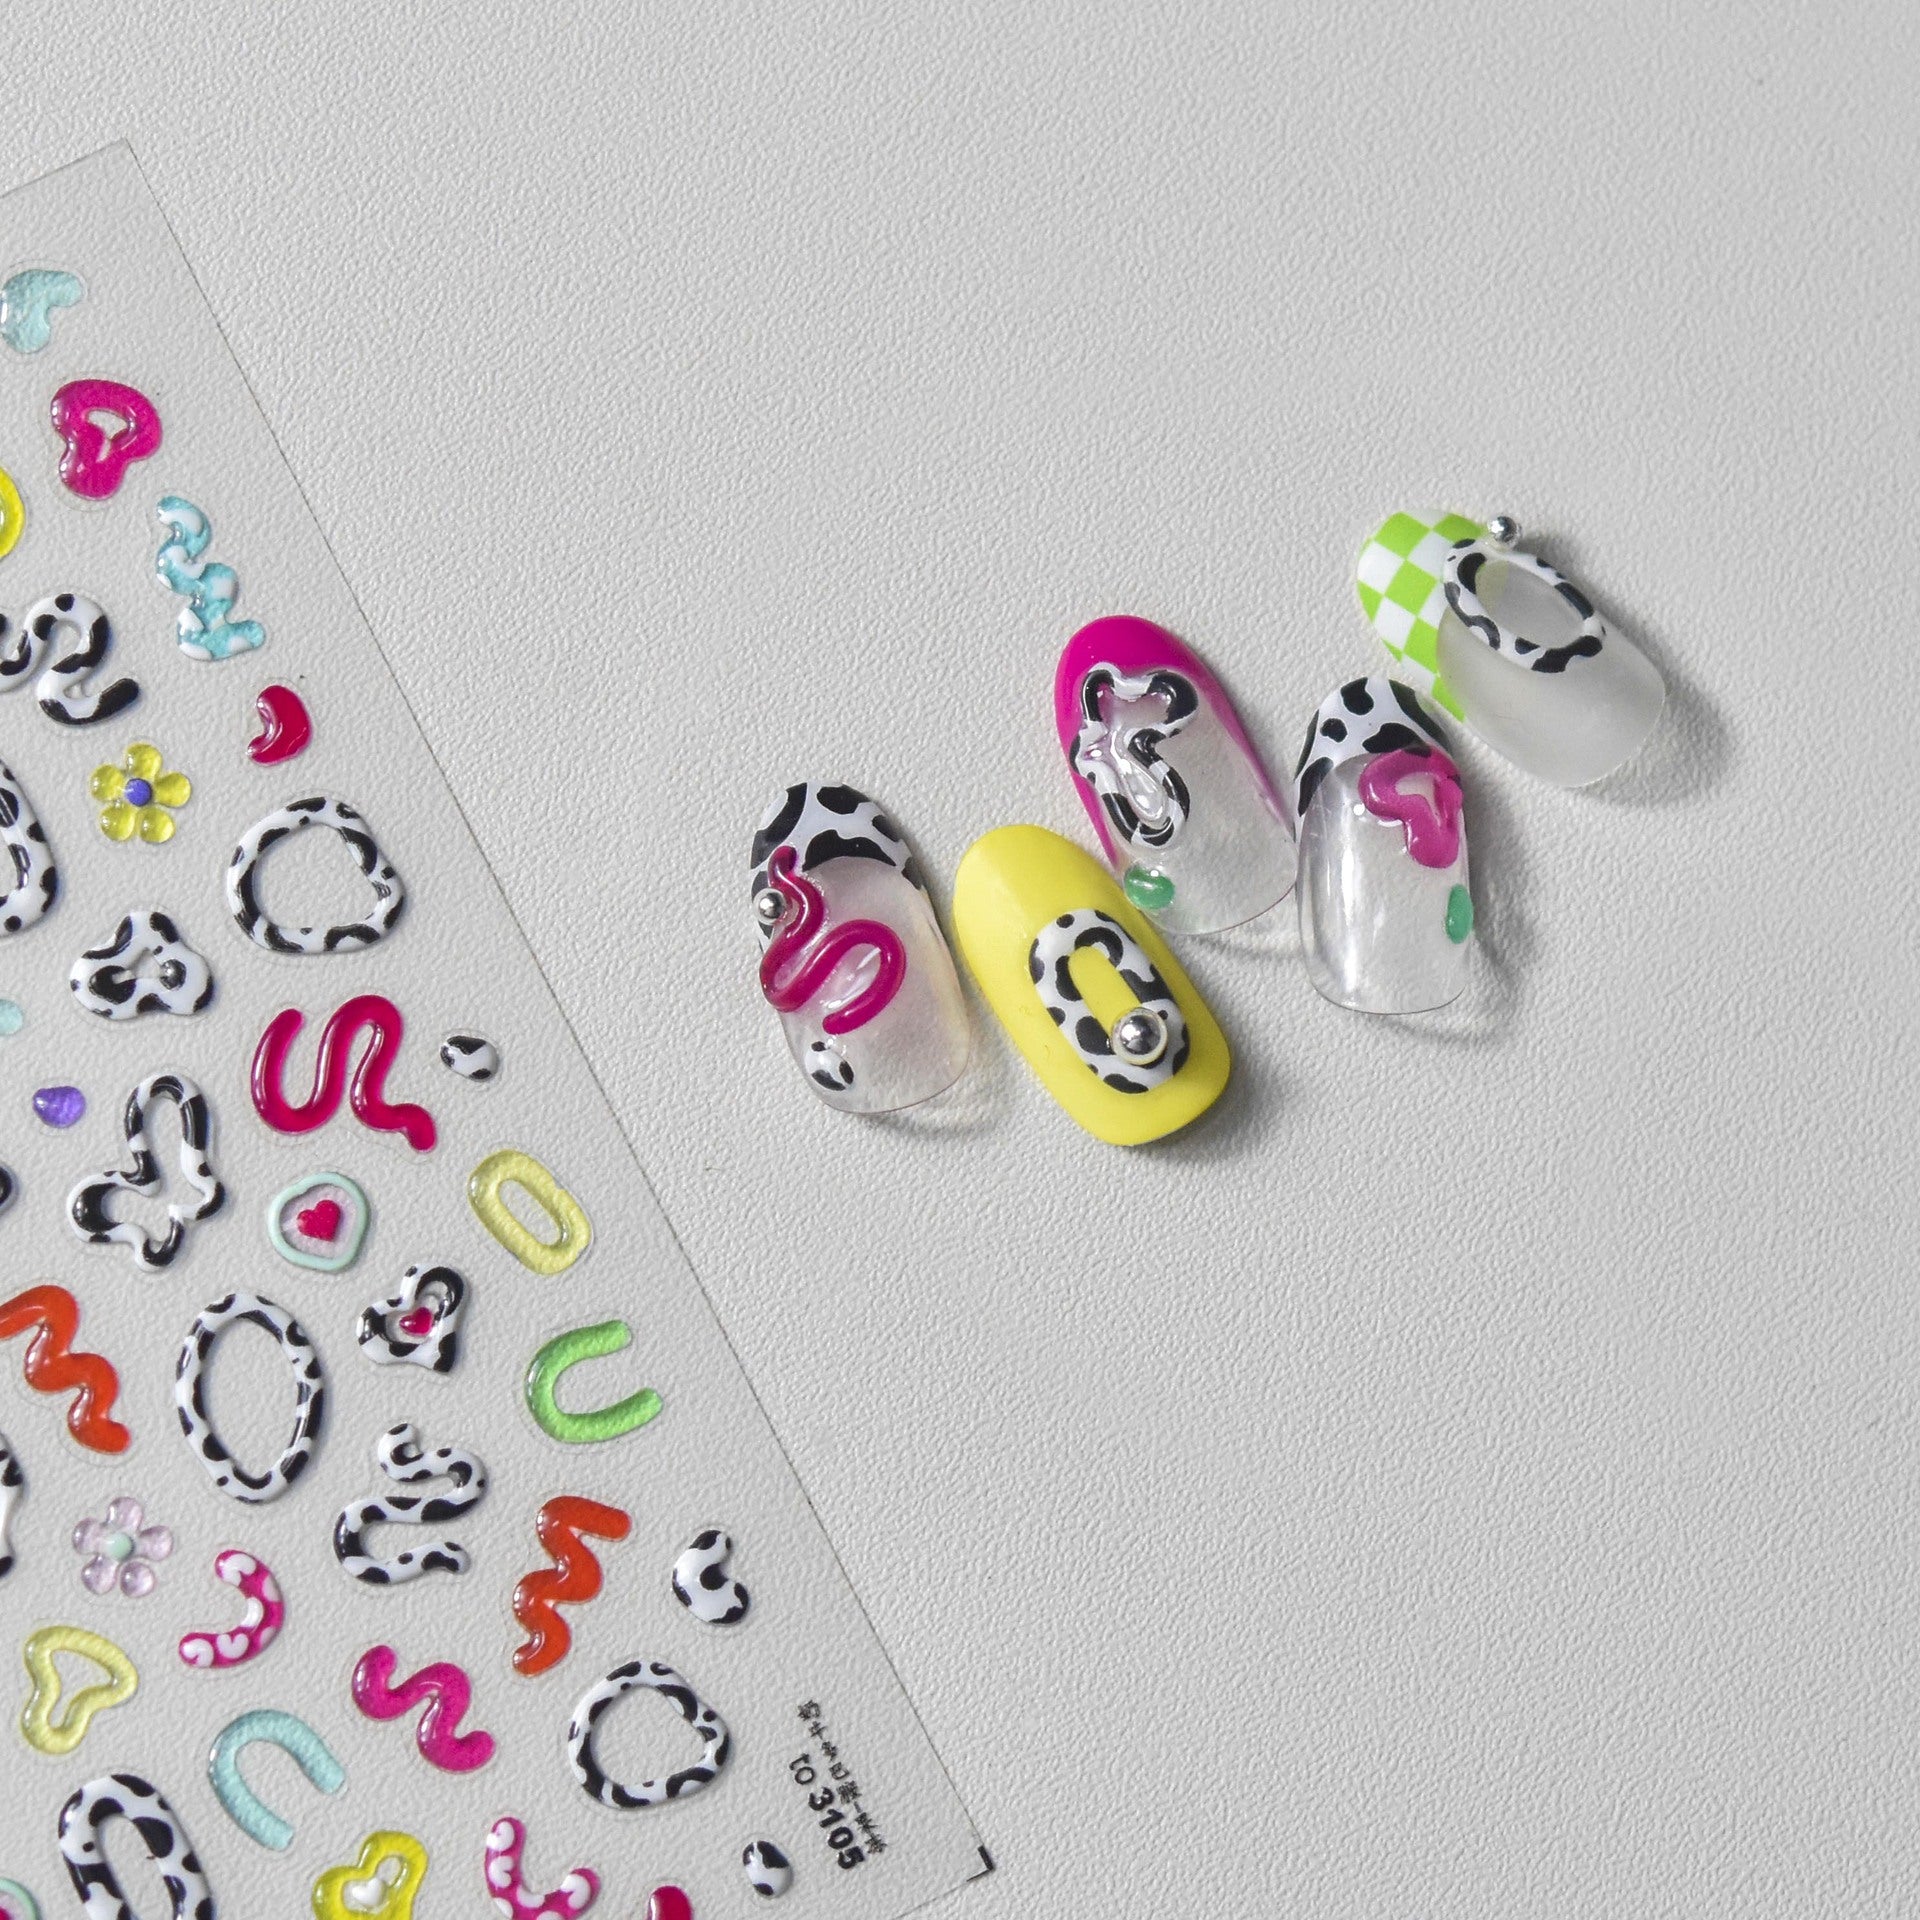 NailMAD Cow Print Nail Art Stickers Adhesive Embossed Cute Bear Bunny Flower Sticker Decals to3054